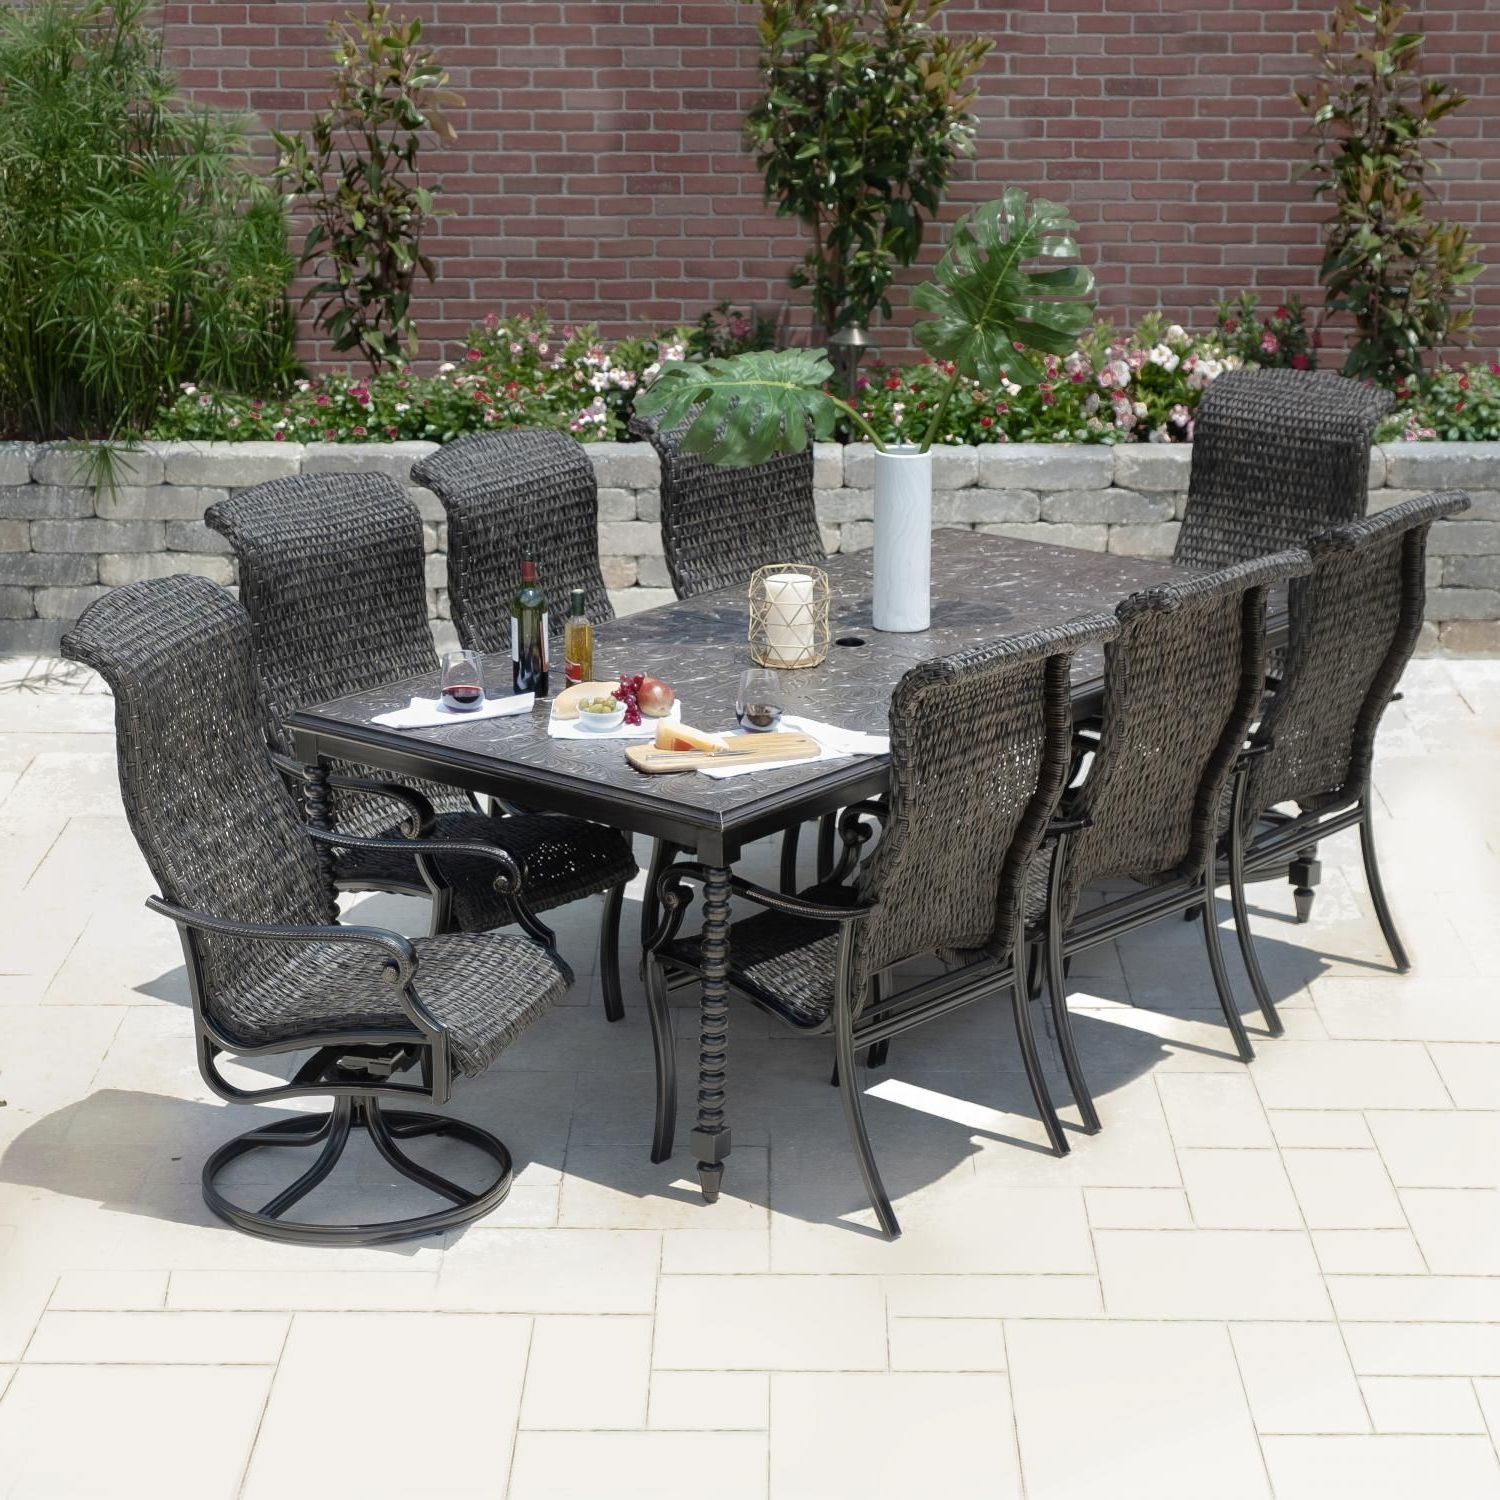 9 Piece Patio Dining Sets With Recent Du Monde 9 Piece Banana Leaf Wicker Patio Dining Set W/ 90 X 46 Inch (View 10 of 15)